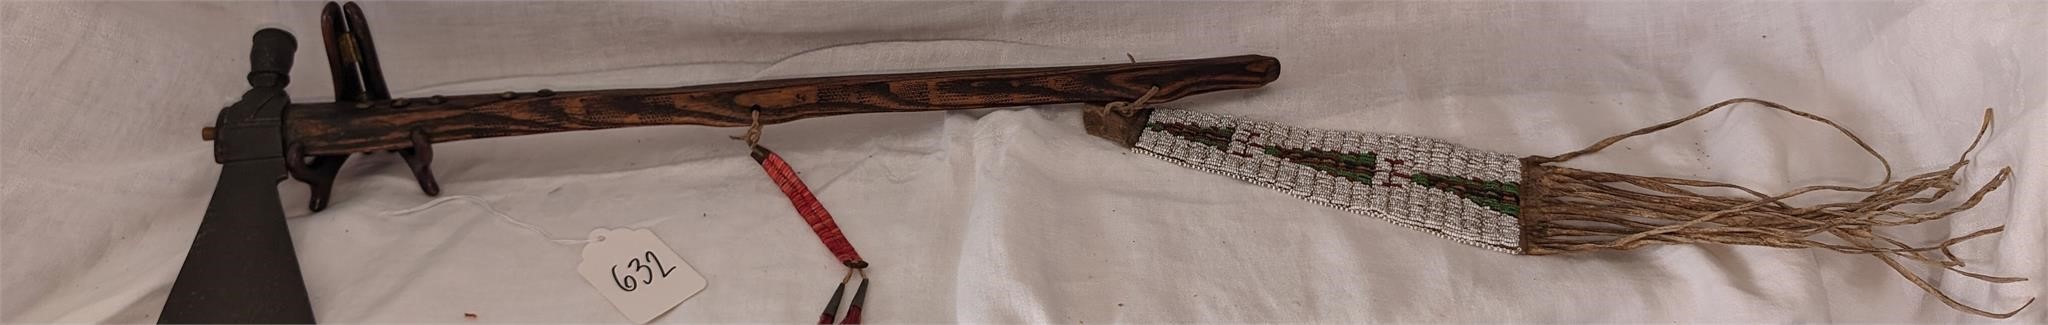 1700's to WW2 Guns, Knives, Daggers, Bayonets & More Auction